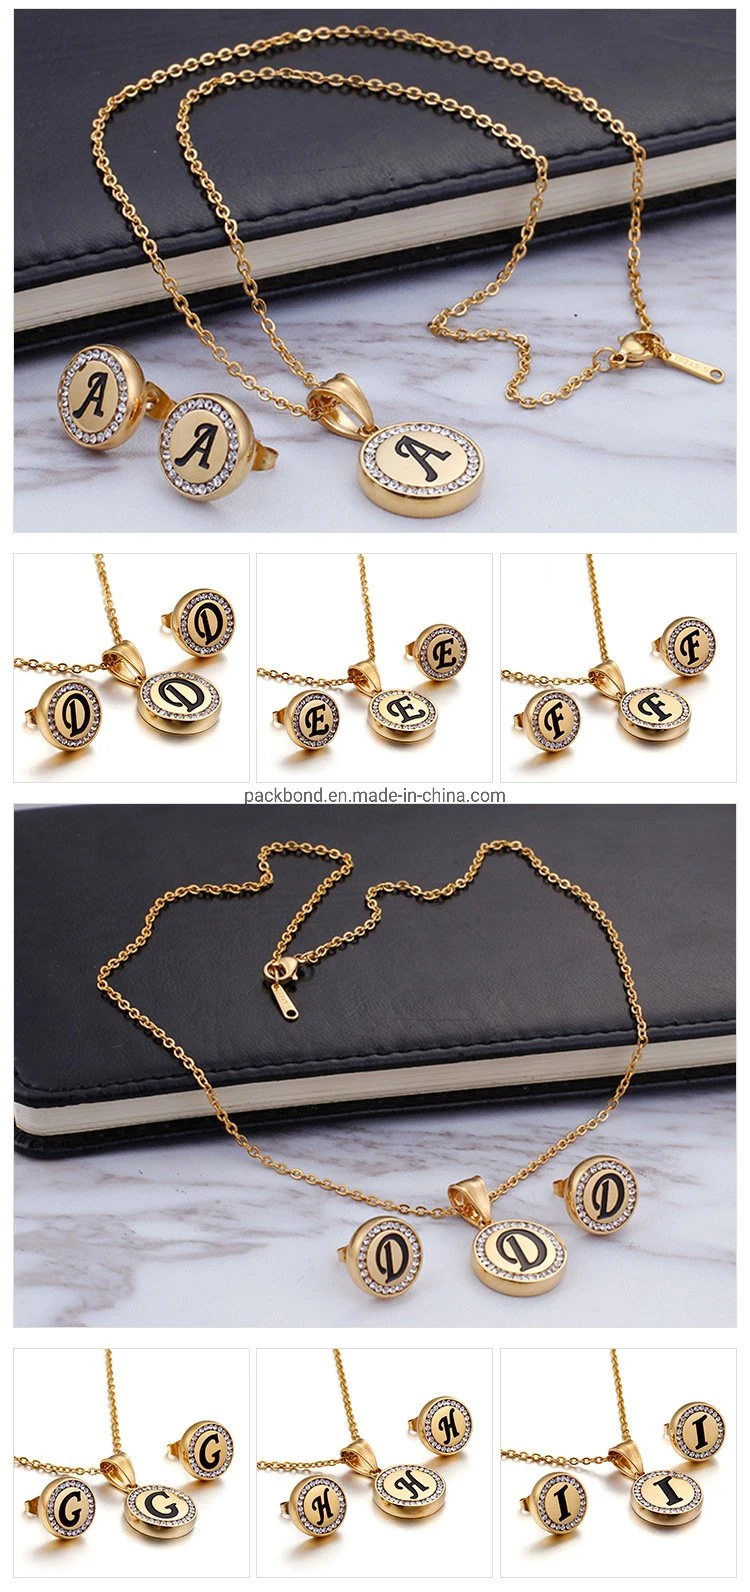 New Fashion 26 Letters 18K Gold Jewelry 316L Stainless Steel Diamond Alphabet Pendant Charm Letter Initial Necklace Short Charm Necklace Earring Set